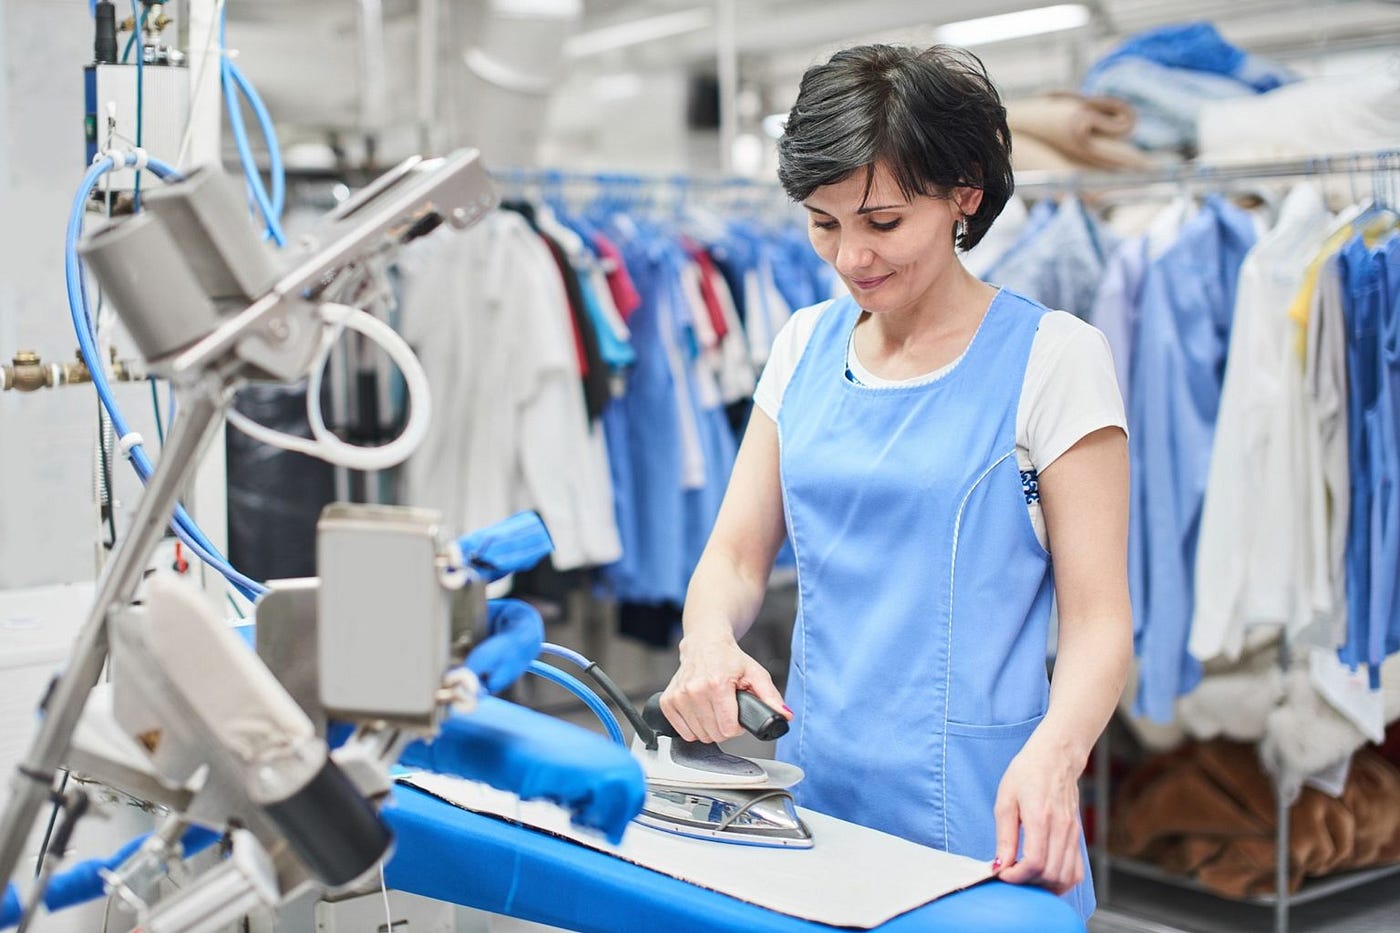 Benefits Of Professional Dry Cleaning For Delicate Fabrics